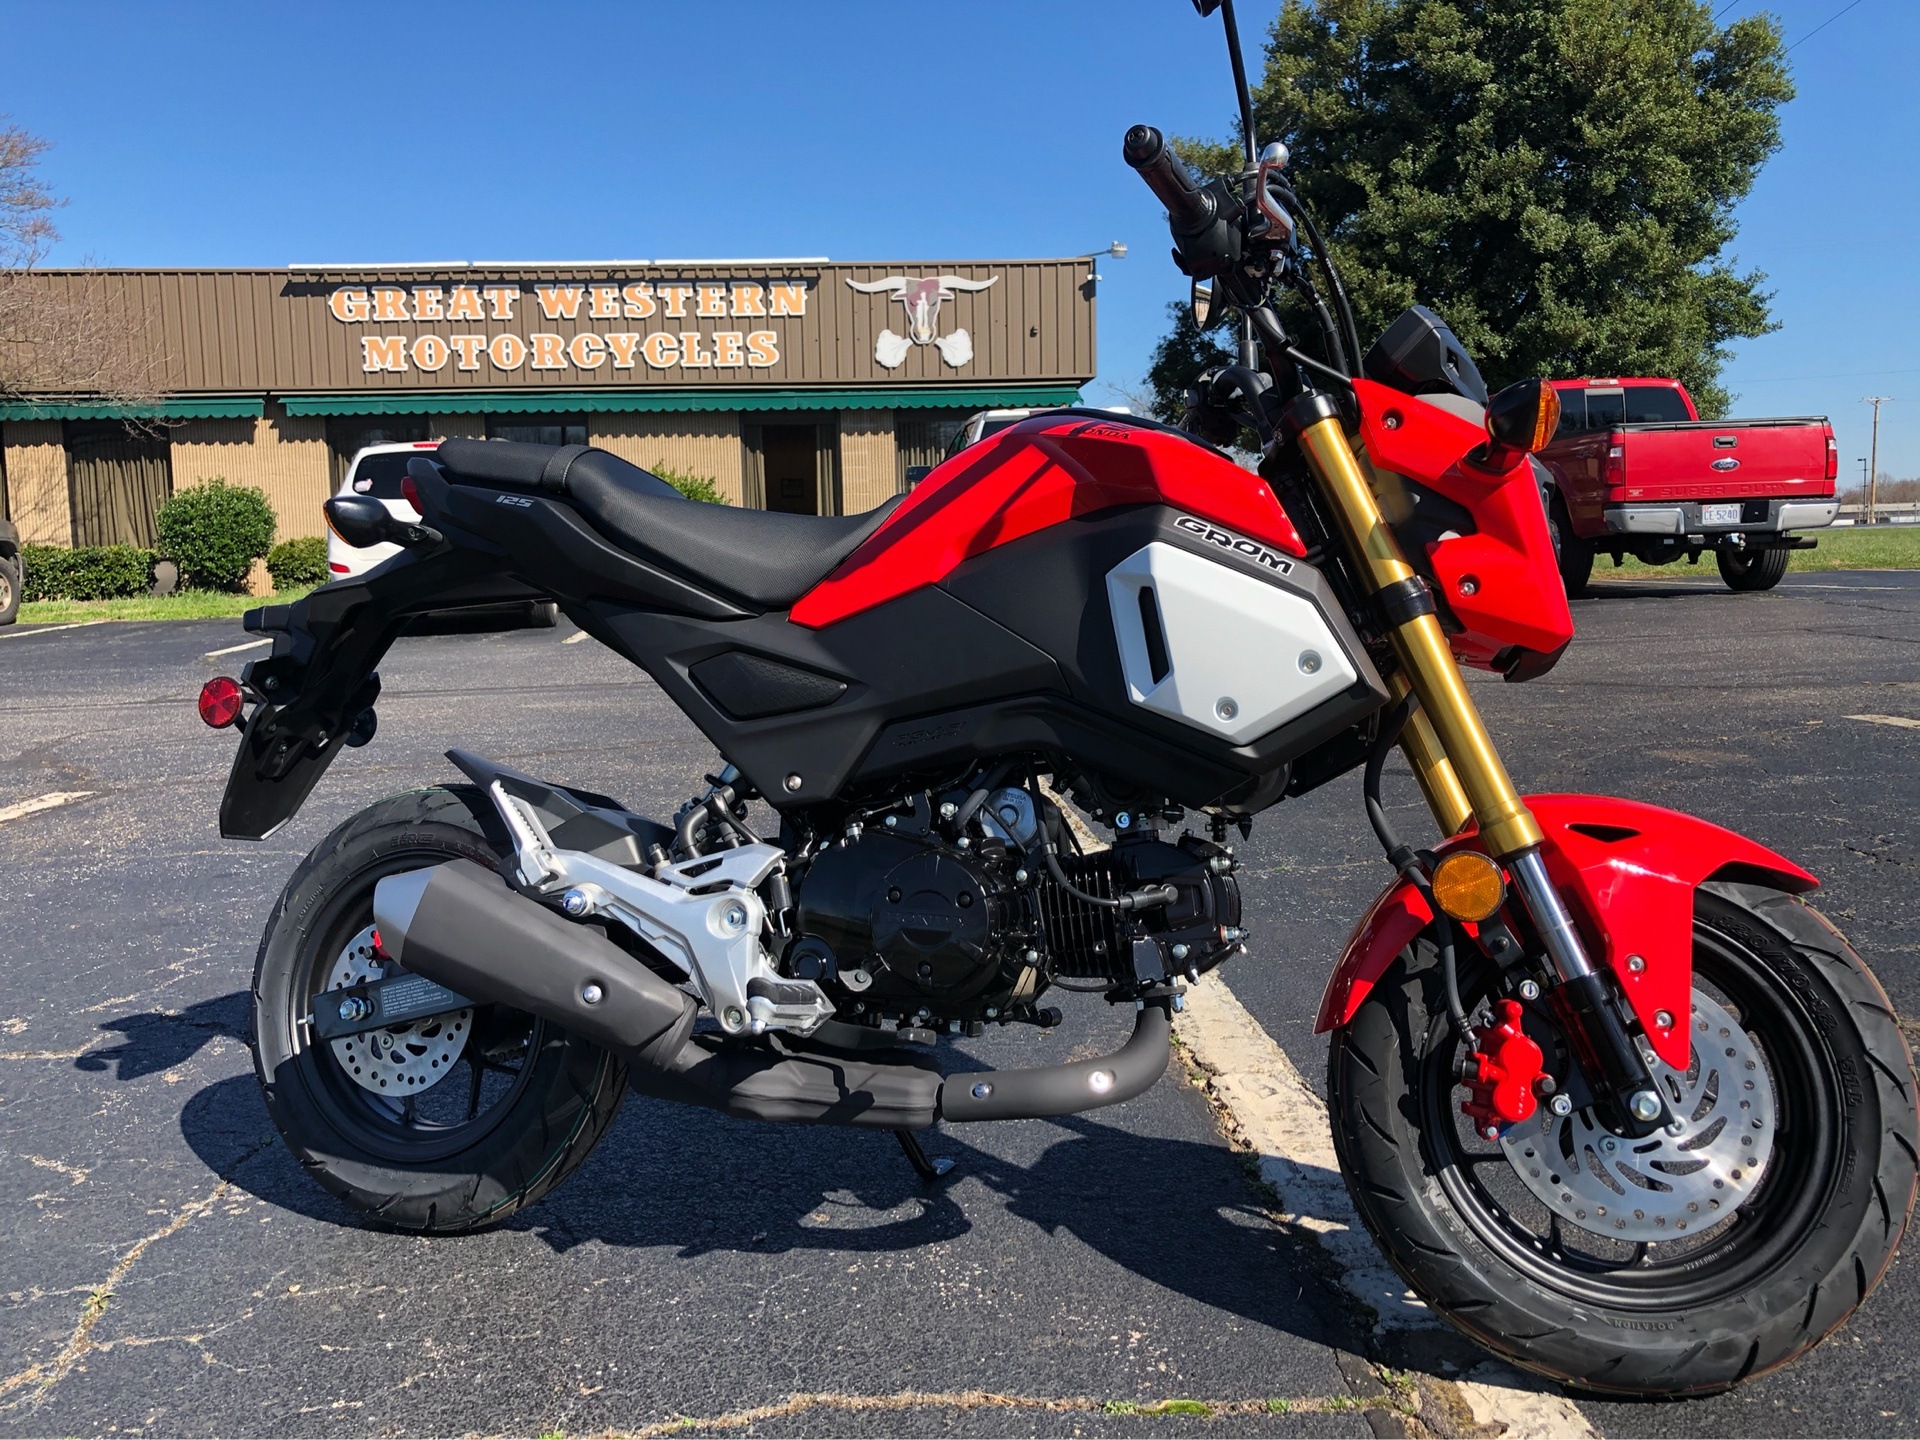 New 2020 Honda Grom Motorcycles in Statesville, NC Stock Number